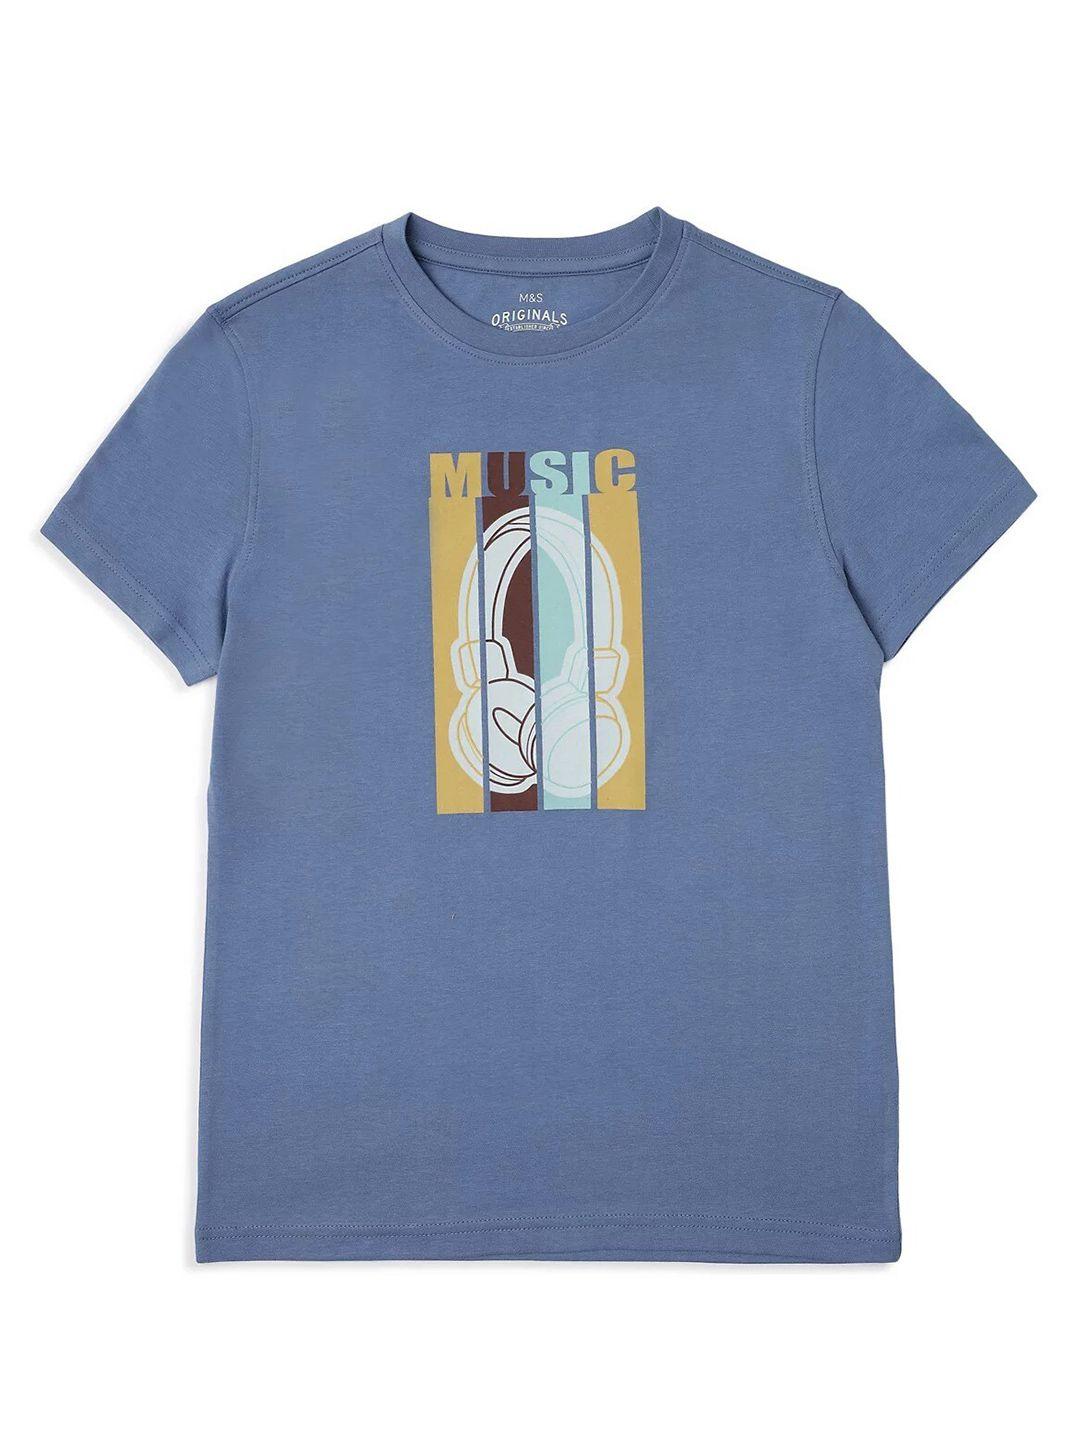 marks & spencer boys graphic printed pure cotton t-shirt